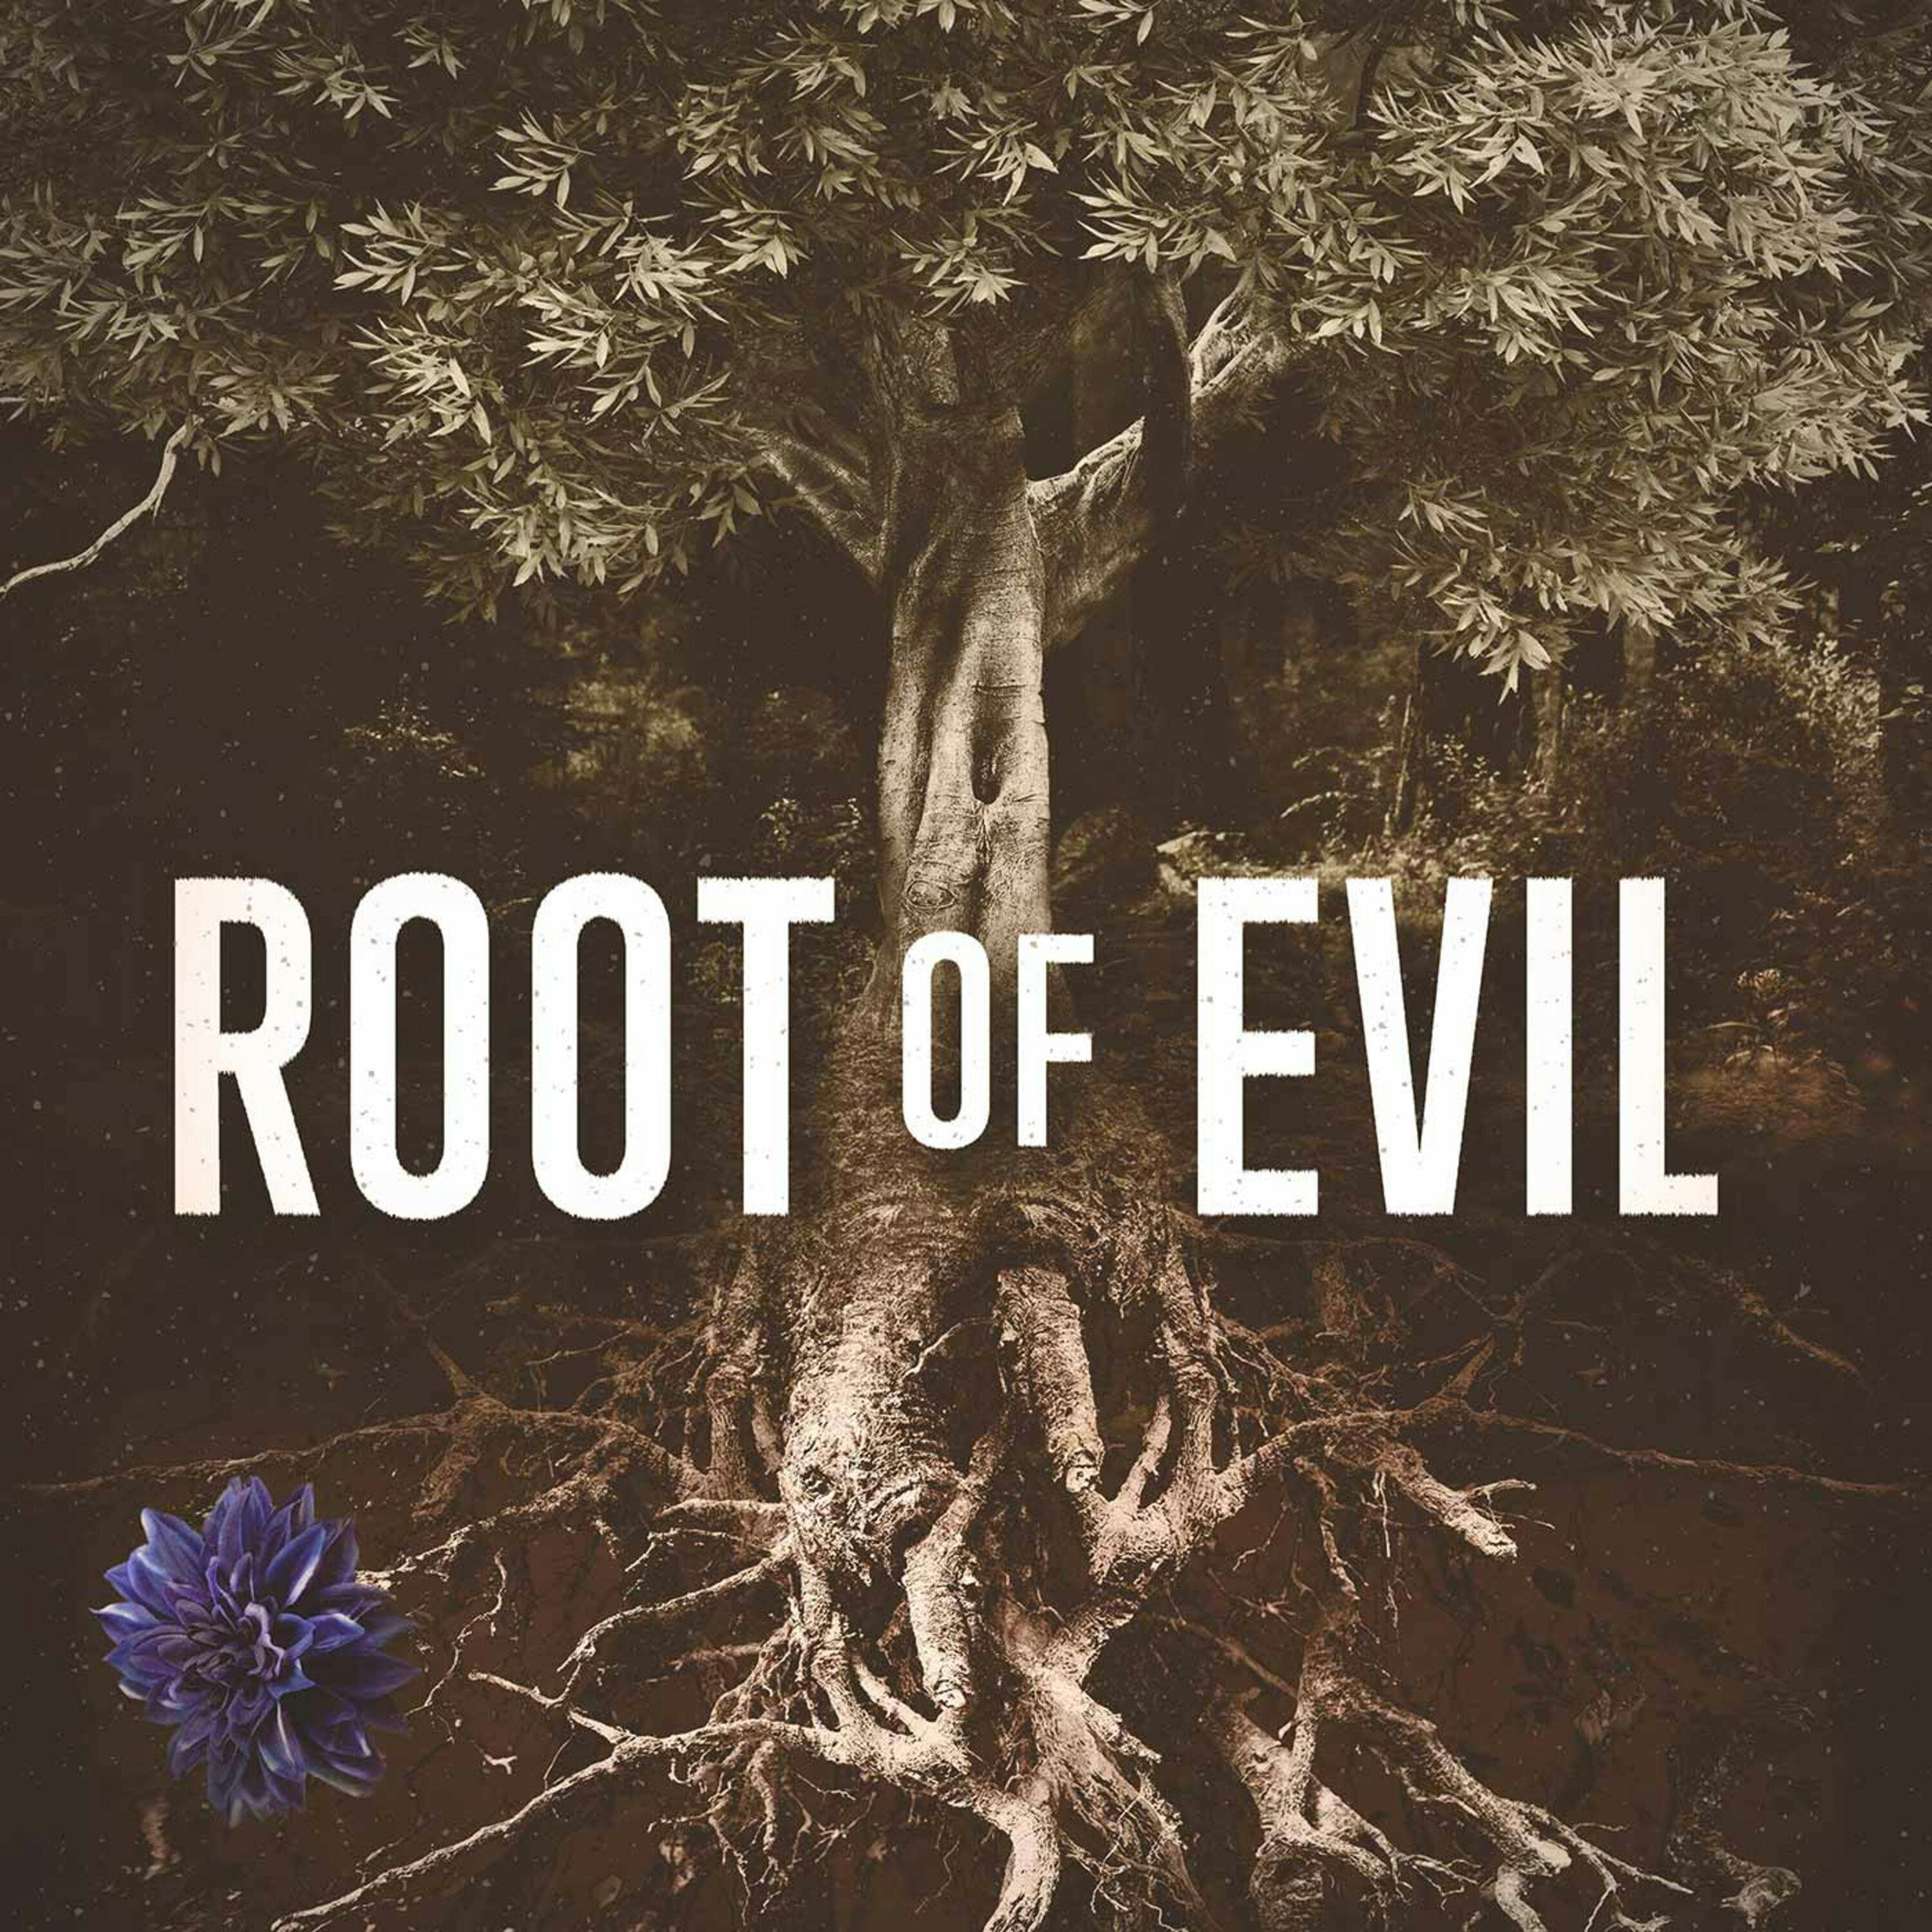 Introducing Root of Evil